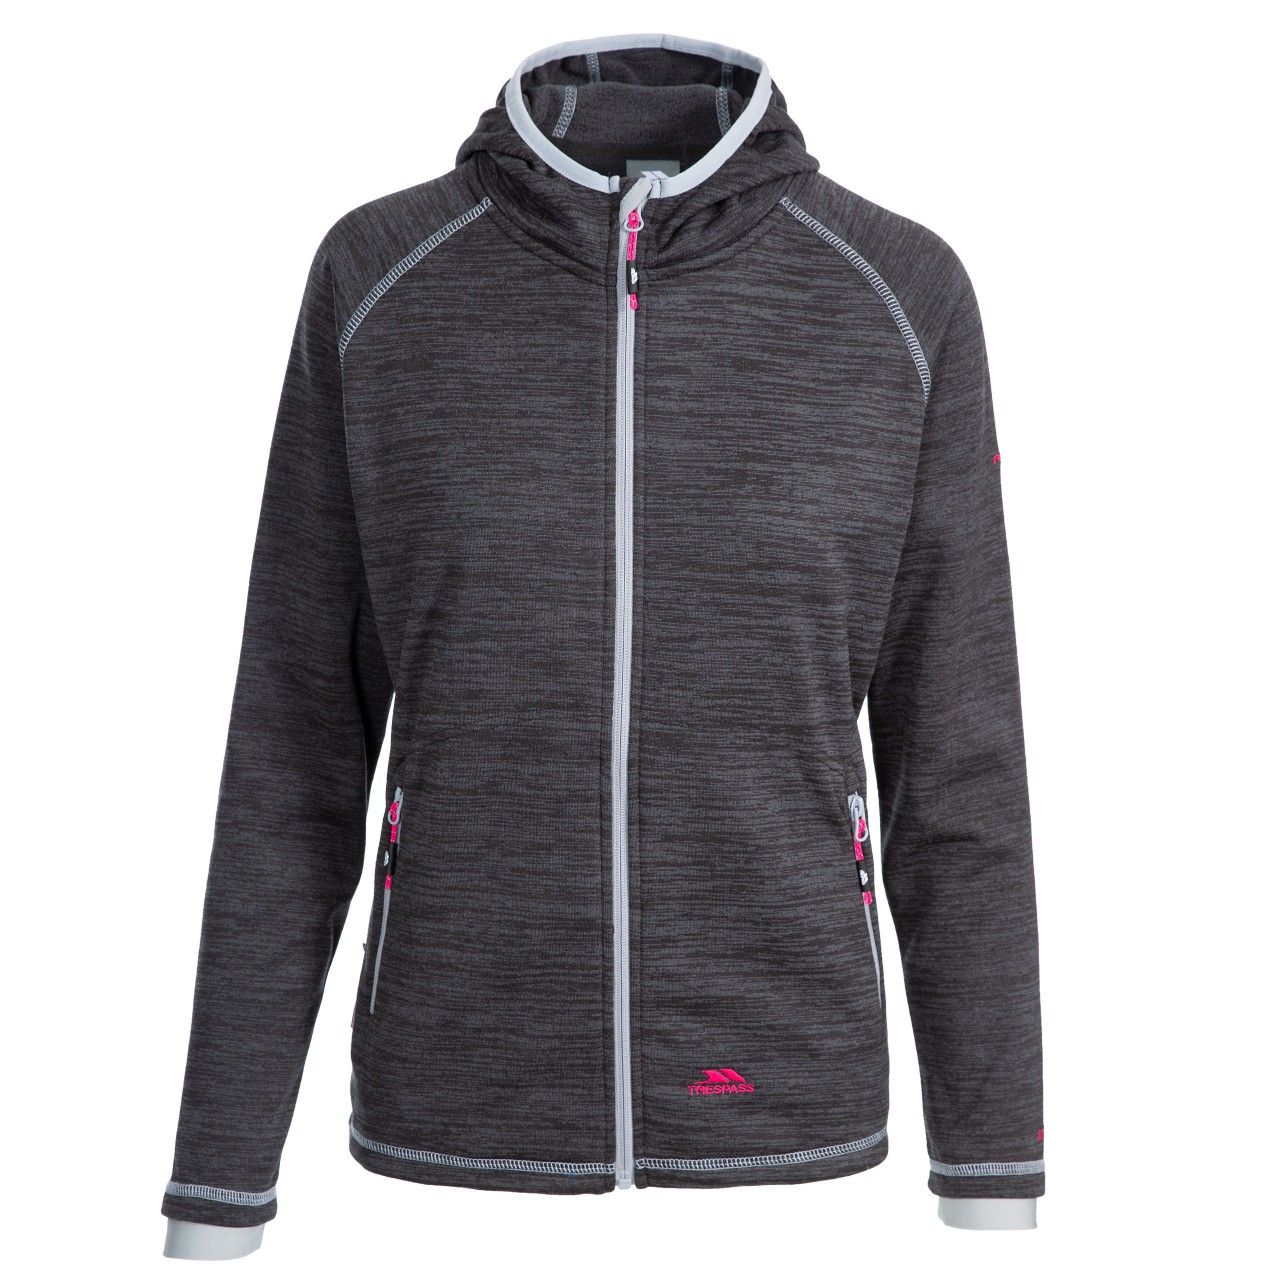 Melange fleece with brushed back. Hooded style. Full front zip with inner facing. 2 zip pockets. Inner stretch cuff. Stretch binding at hood. Coverstitch detail. 230gsm. 100% Polyester. Trespass Womens Chest Sizing (approx): XS/8 - 32in/81cm, S/10 - 34in/86cm, M/12 - 36in/91.4cm, L/14 - 38in/96.5cm, XL/16 - 40in/101.5cm, XXL/18 - 42in/106.5cm.